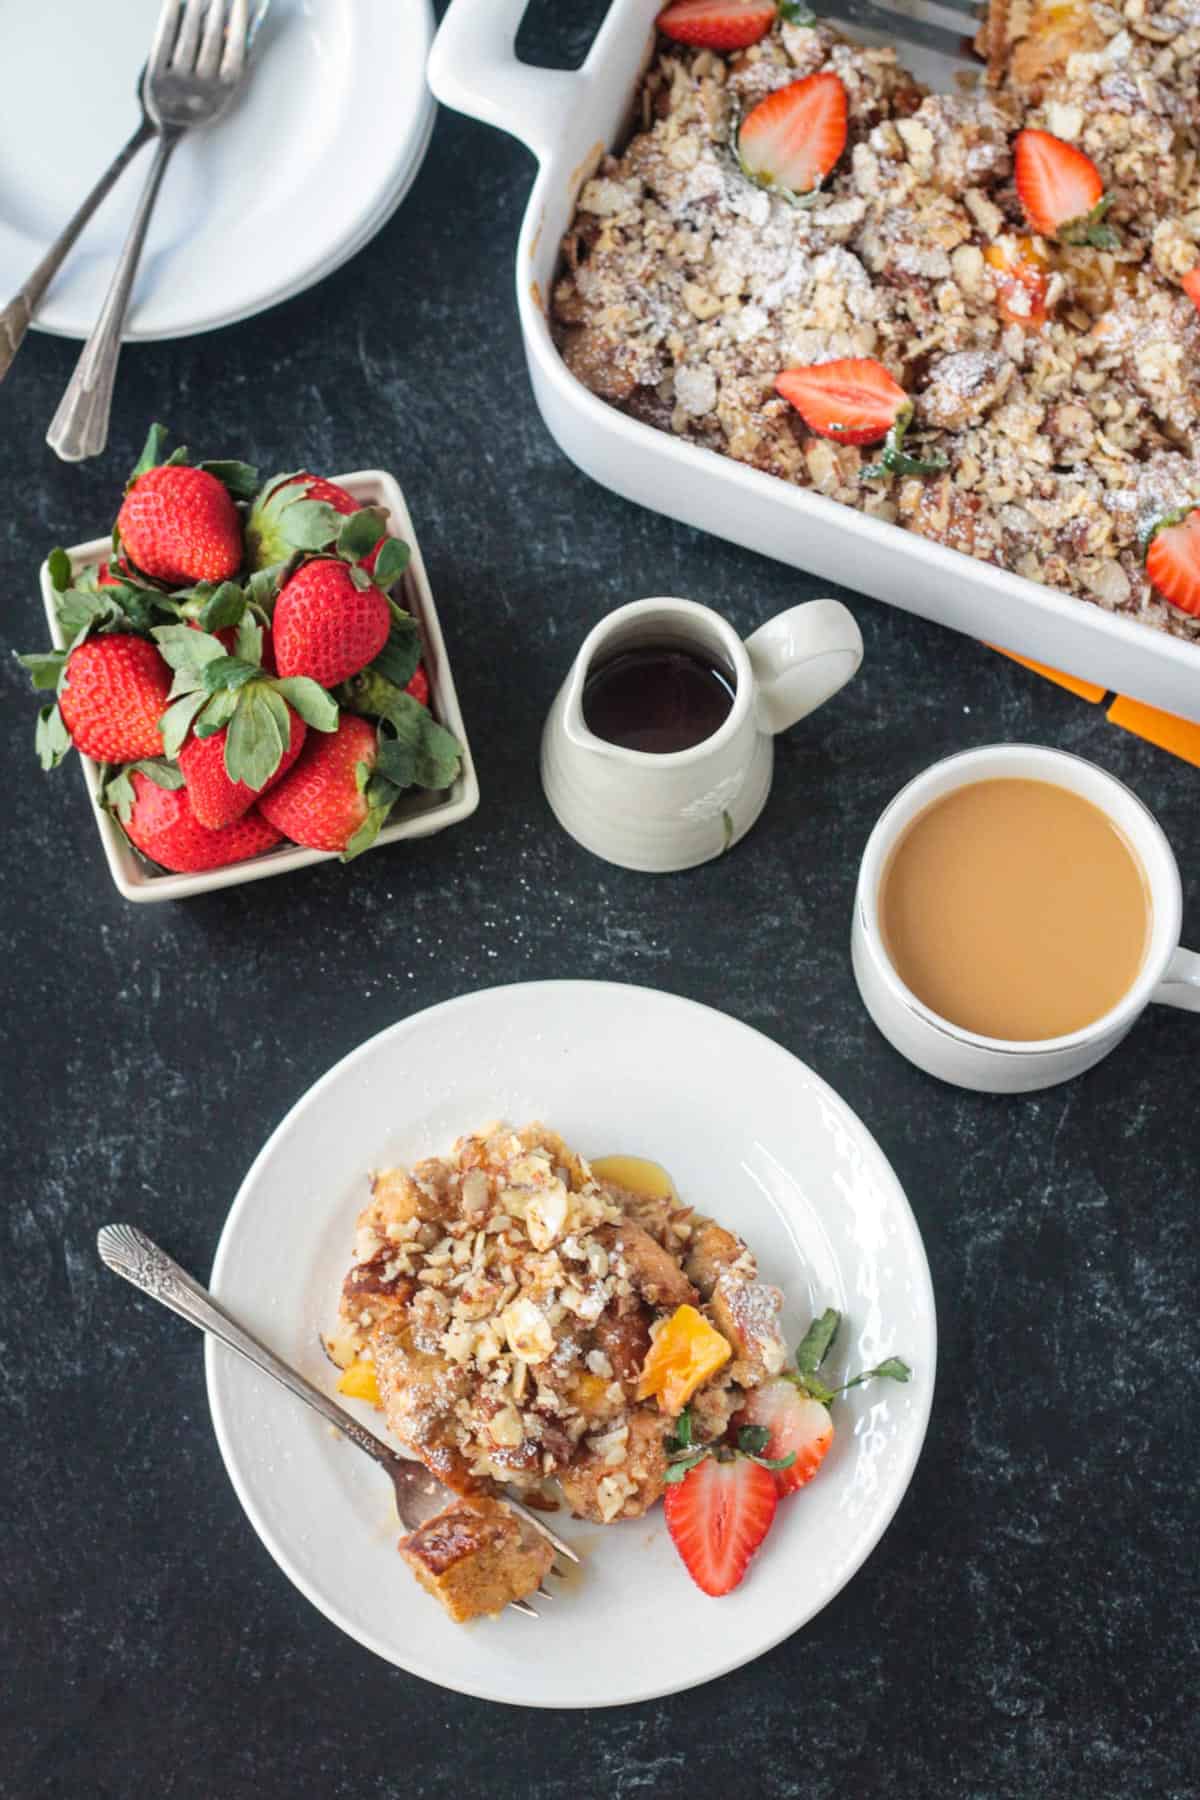 Vegan french toast casserole on a plate next to the serving dish, cup of coffee, and fresh strawberries.